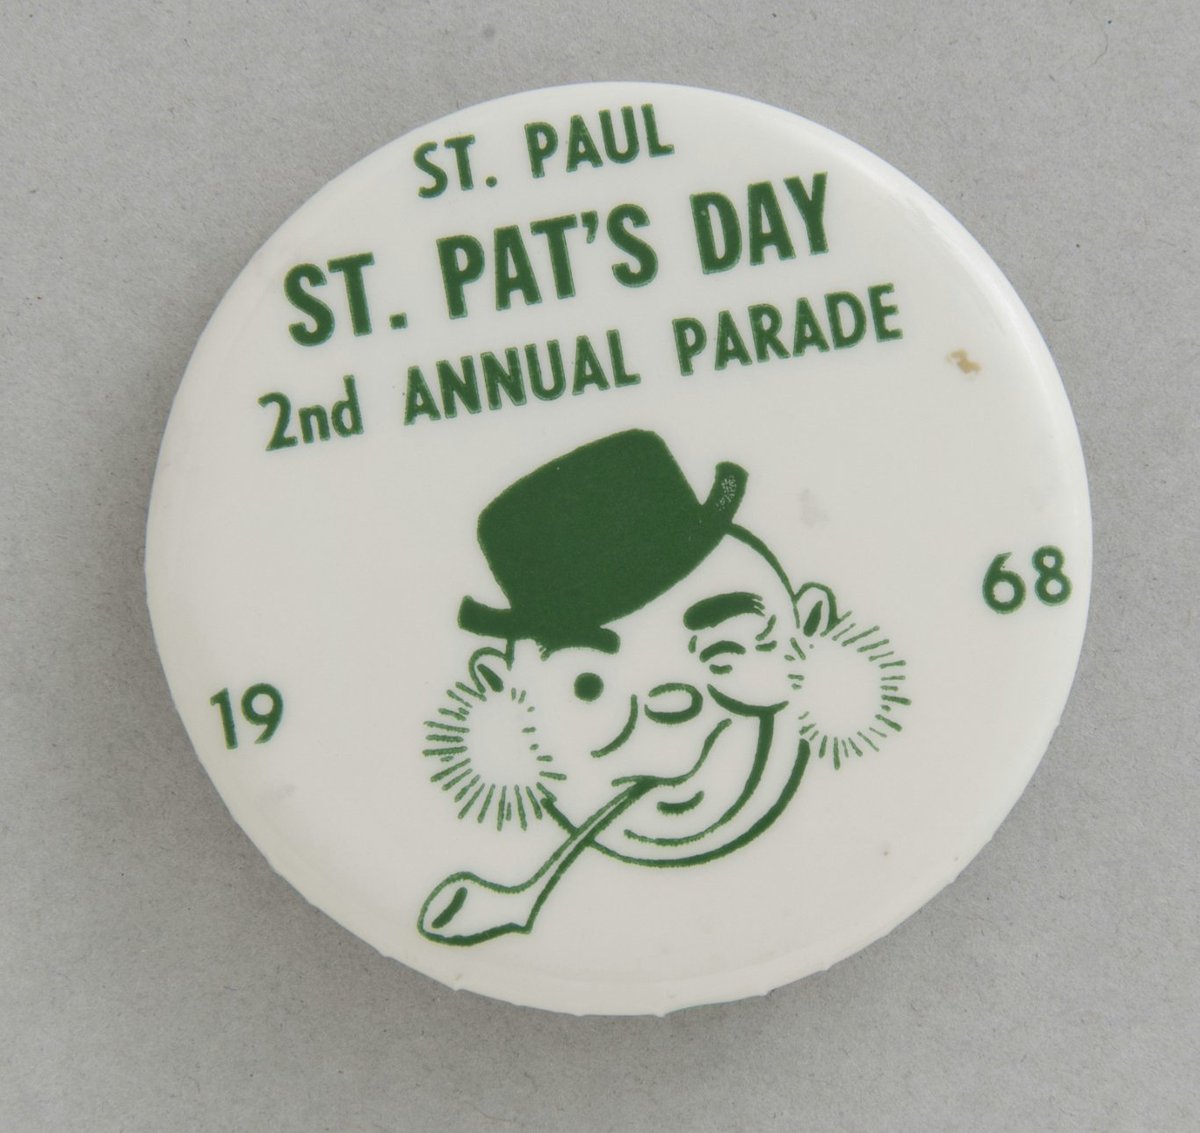 Happy St. Patrick's Day! Check out this St. Patrick's Day button from the 2nd annual parade in 1968. Image: St. Patrick's Day button. 1968. Minnesota Historical Society, Saint Paul, MN.